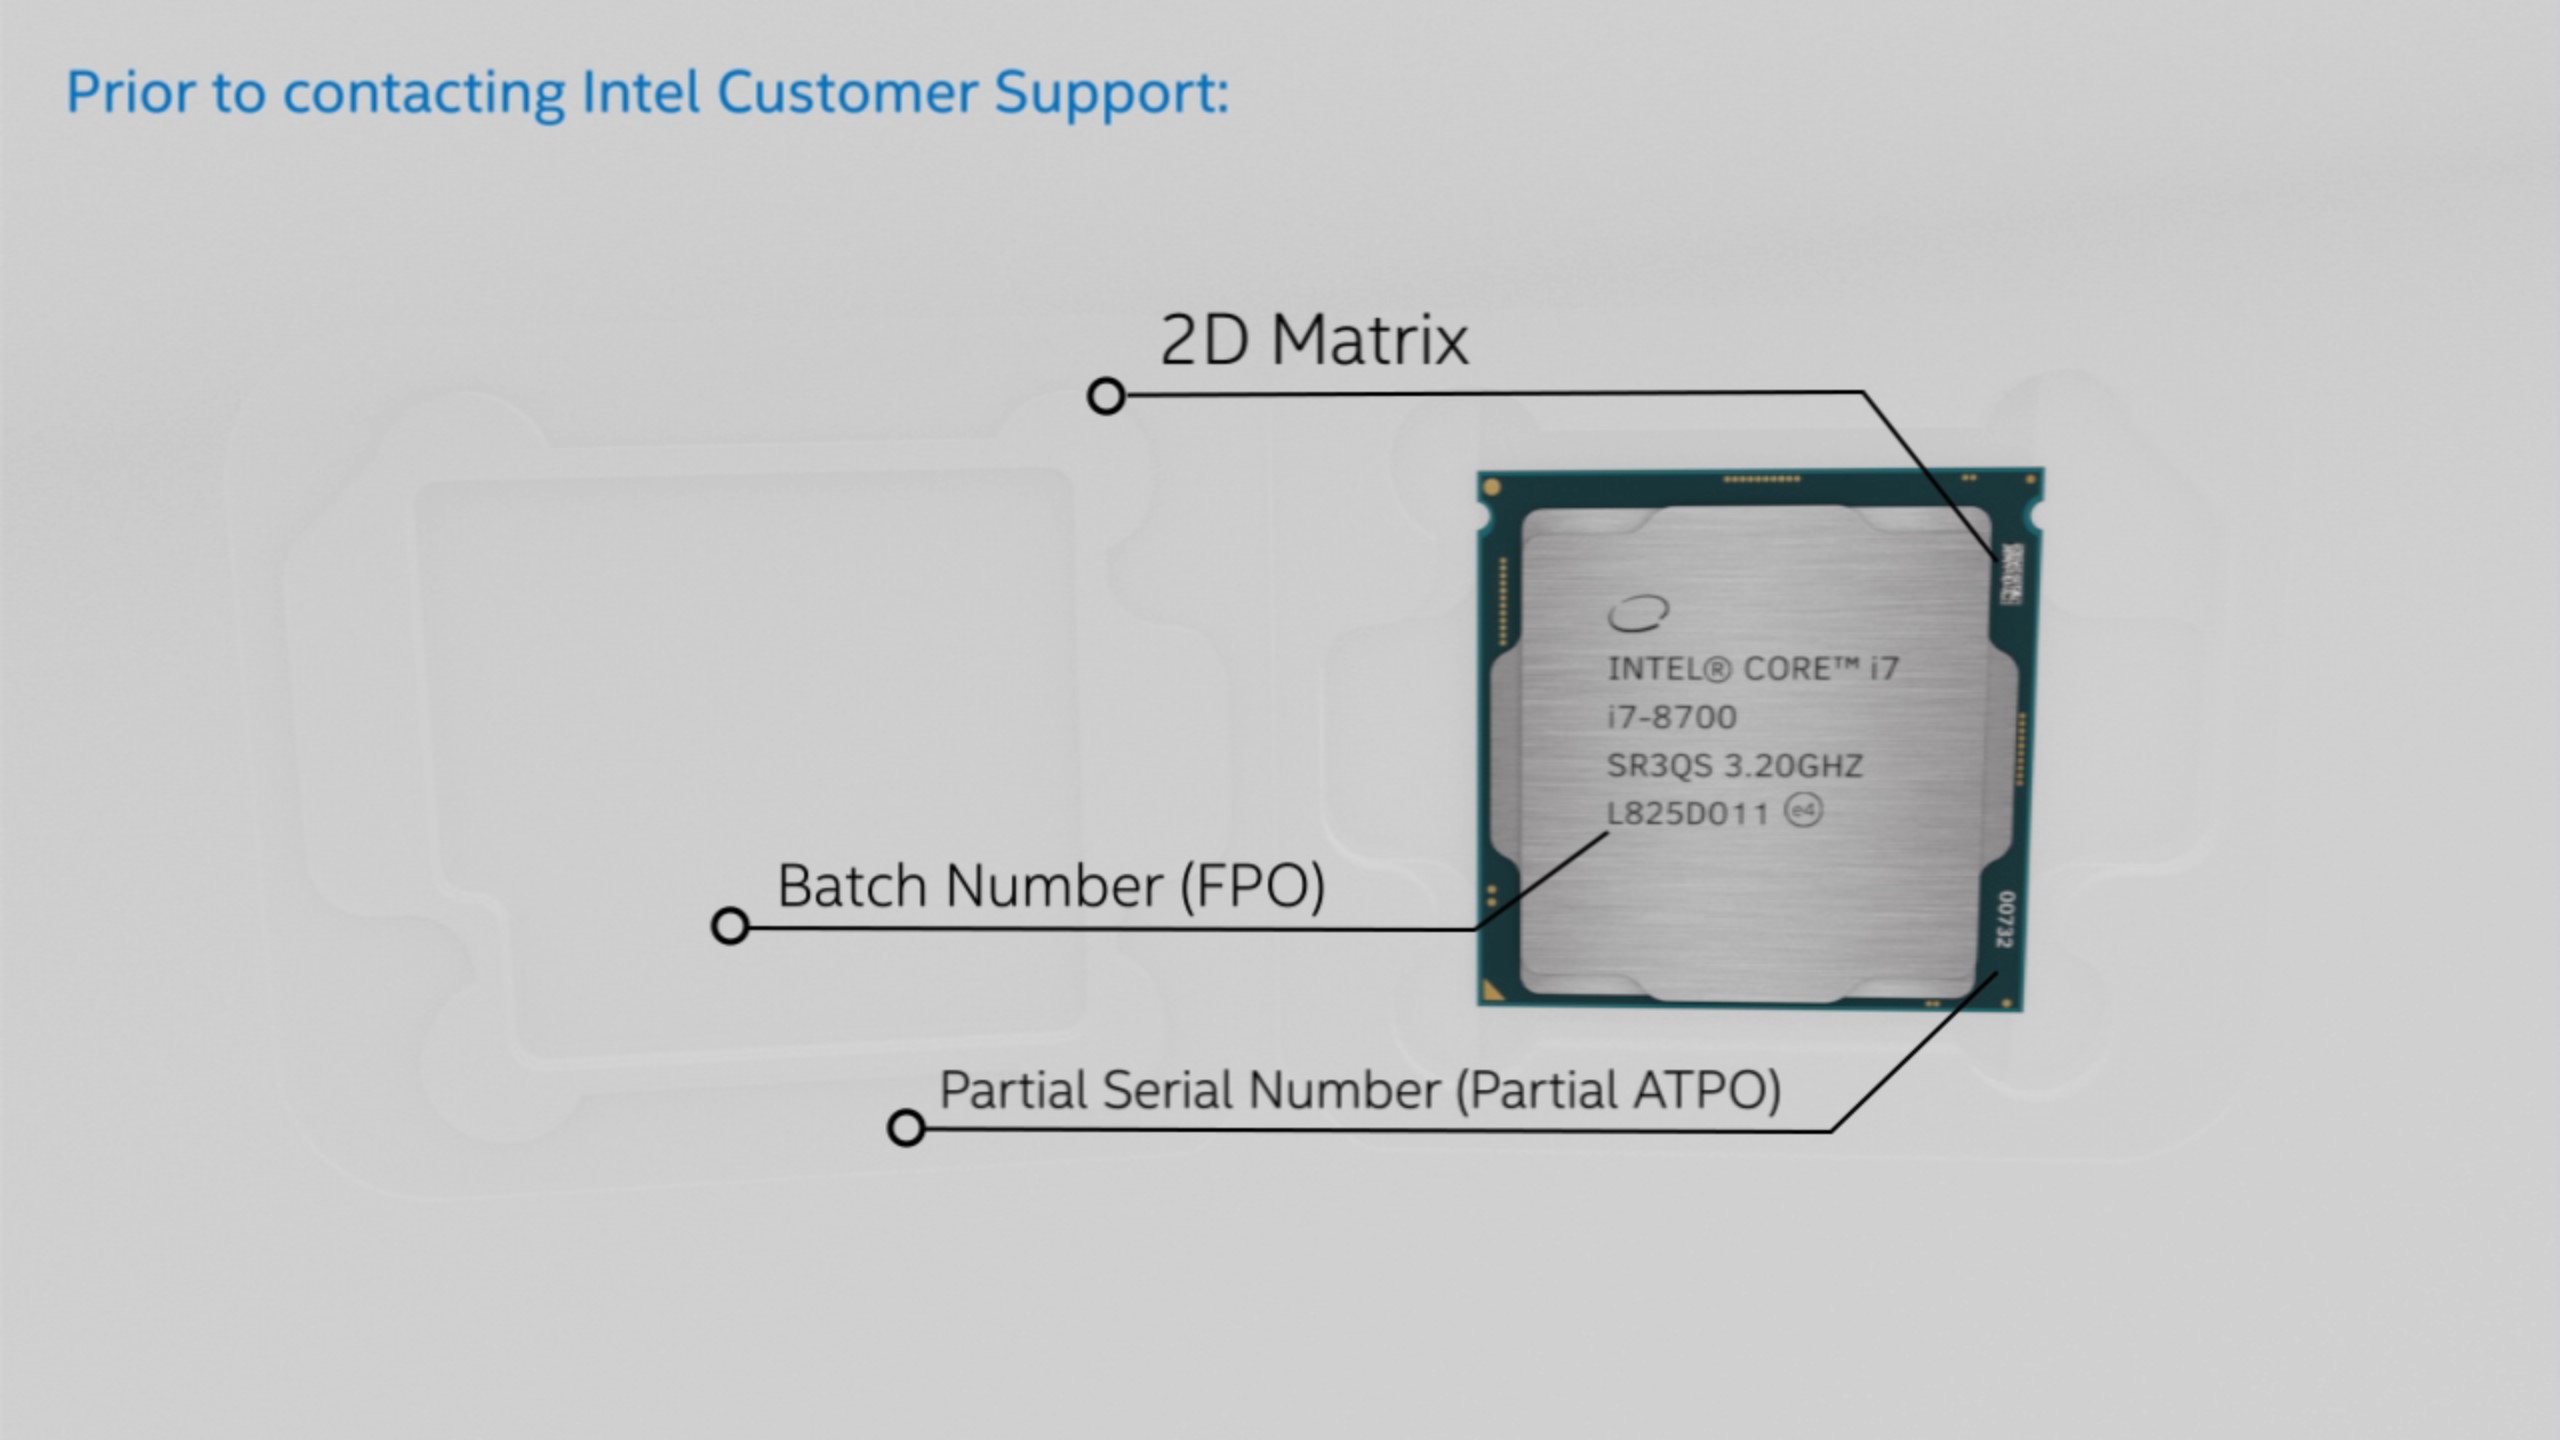 Where to find the serial number and the batch number for an Intel CPU.